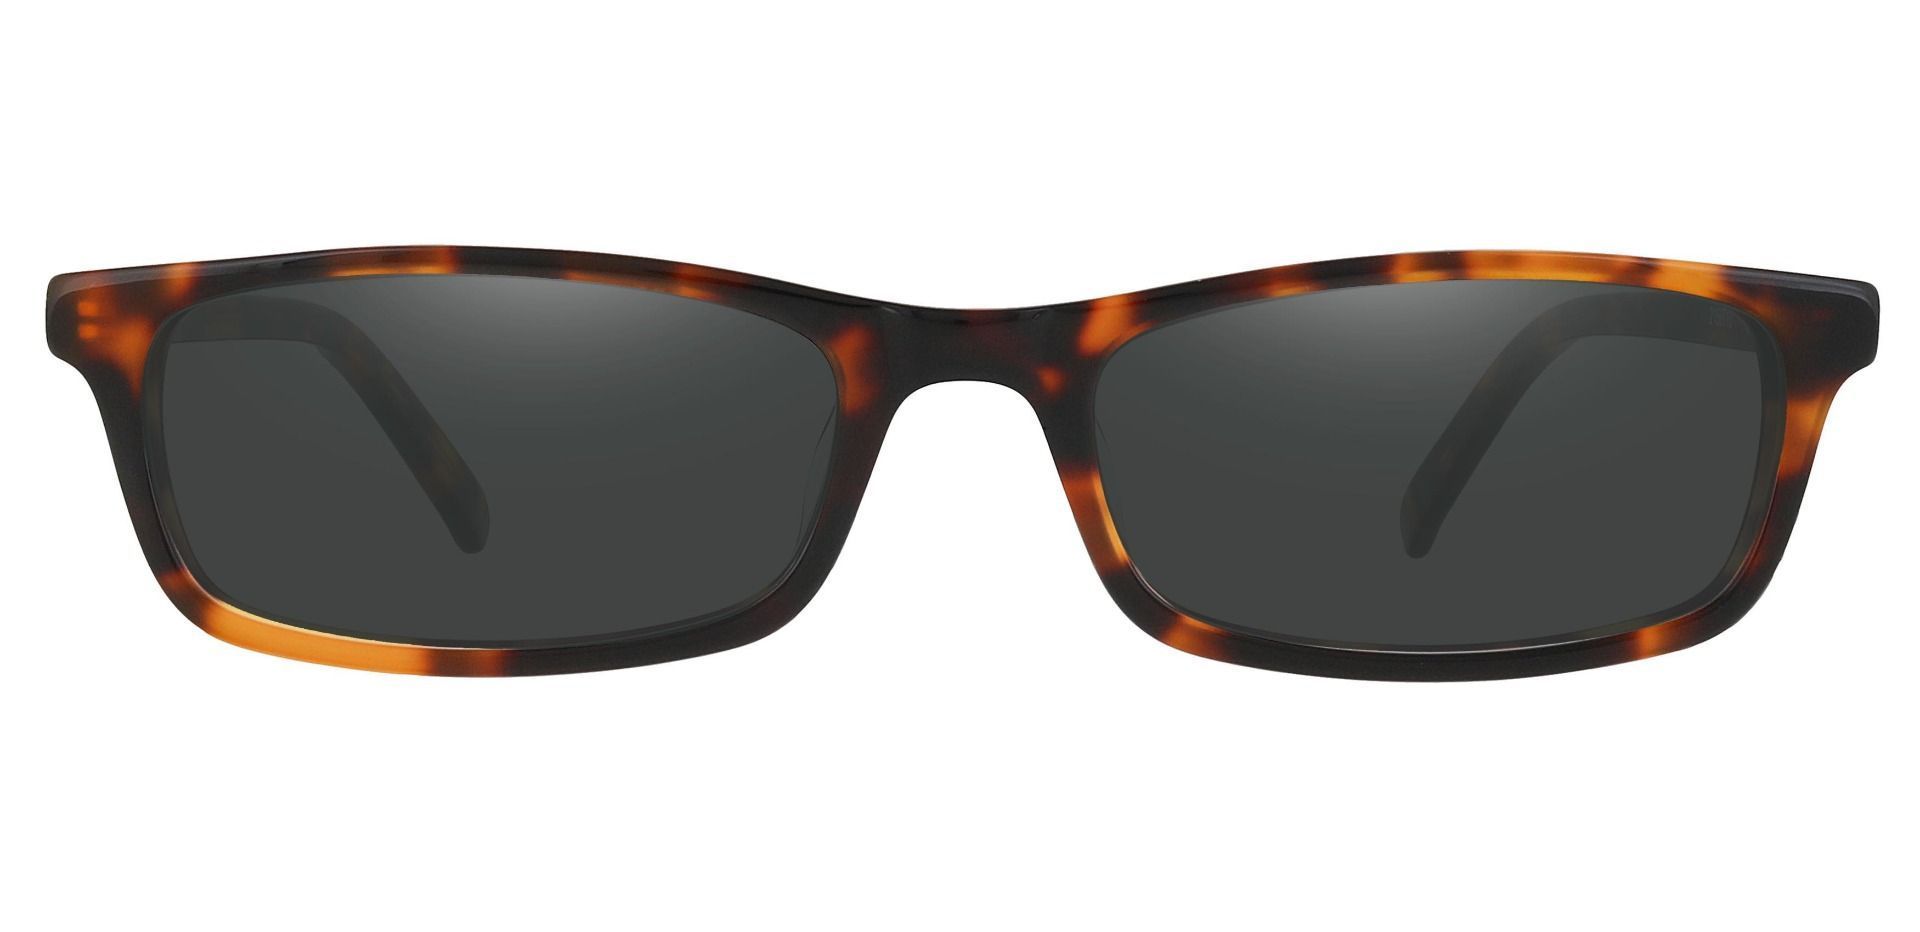 Palisades Rectangle Single Vision Sunglasses - Black Frame With Gray ...